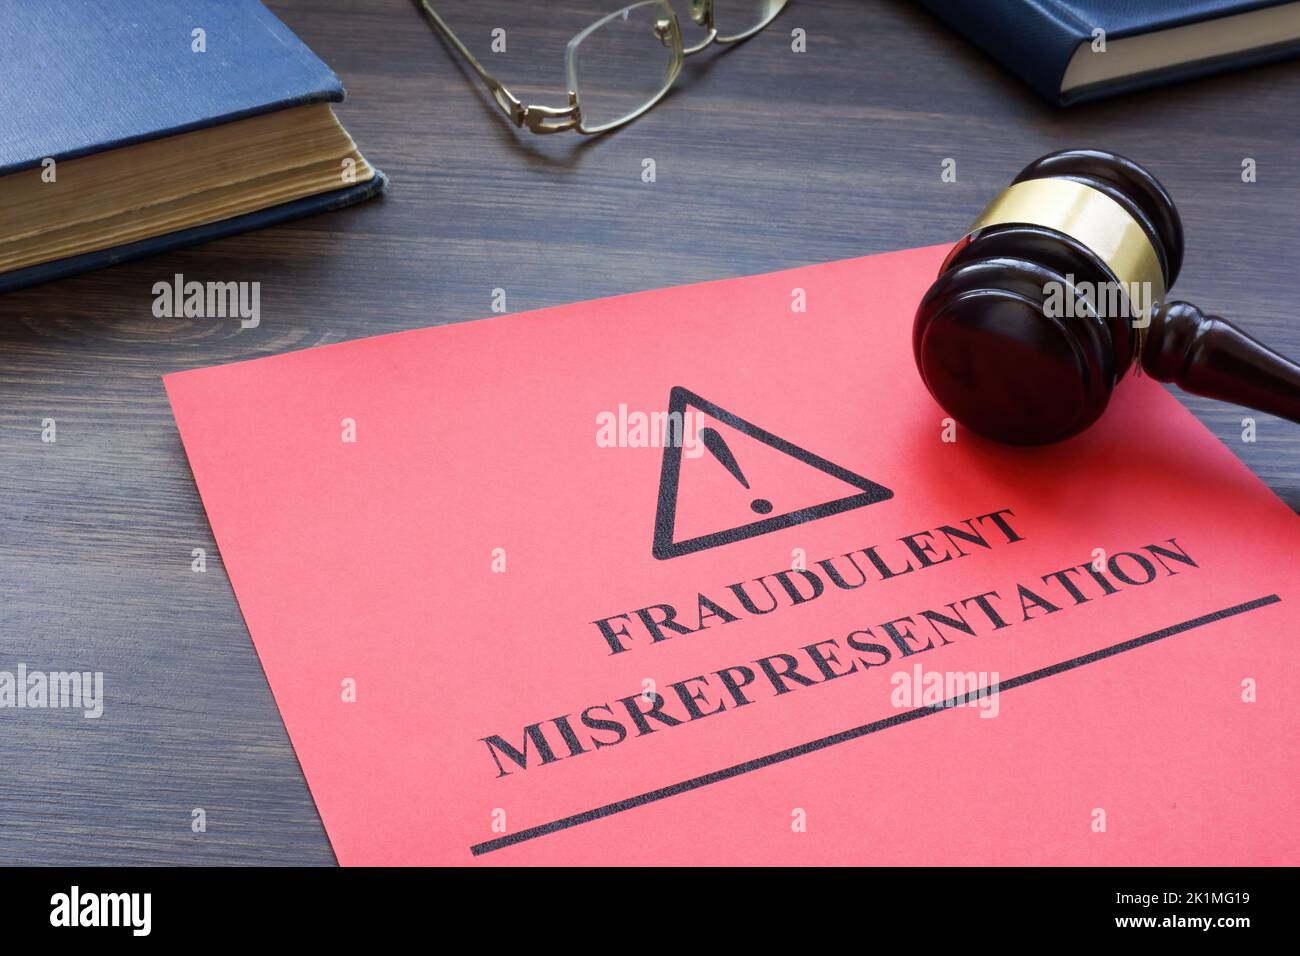 Papers about fraudulent misrepresentation in the court. Stock Photo